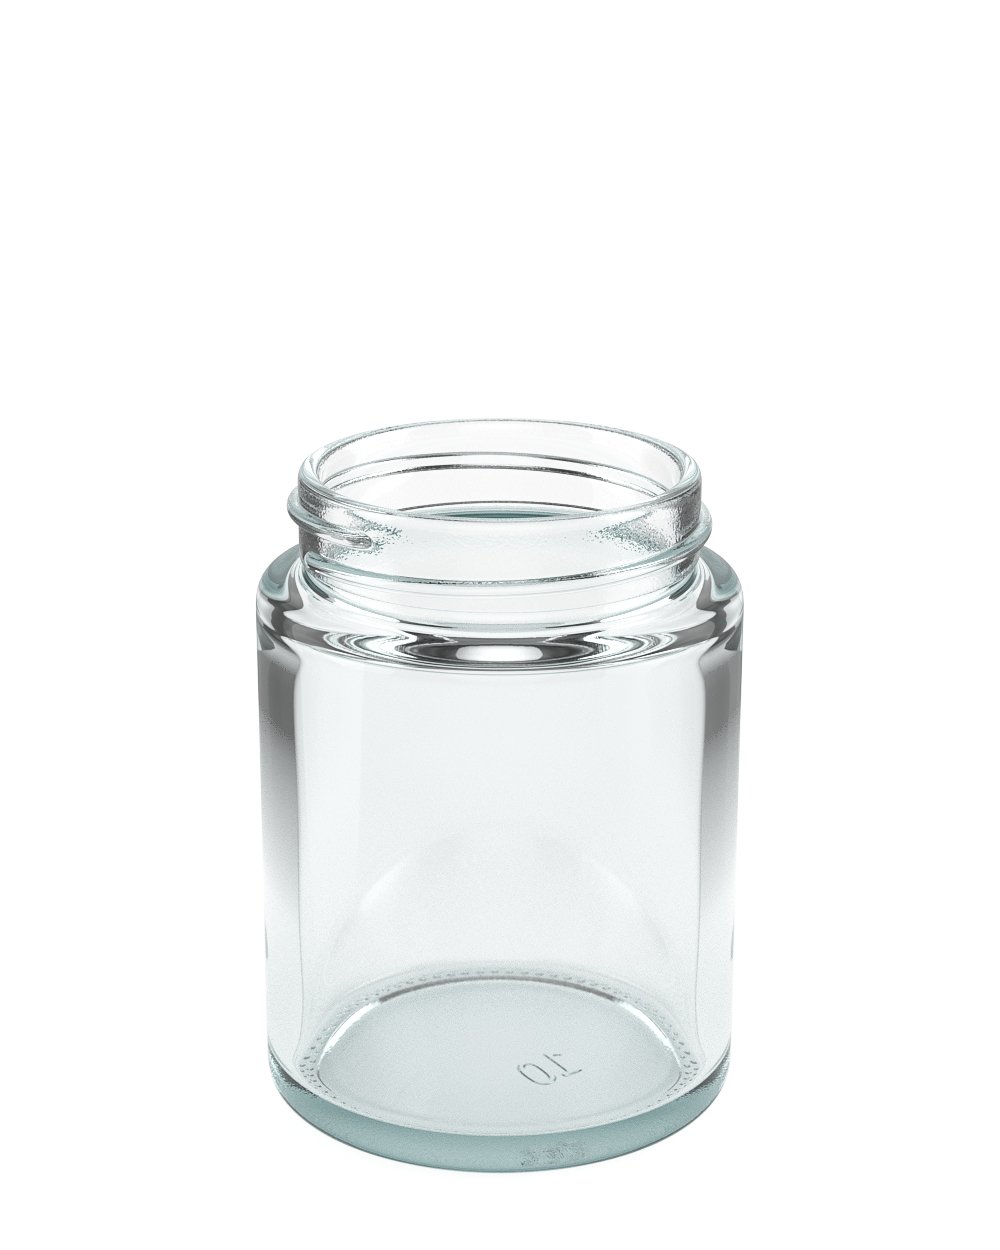 Child Resistant | Straight Sided Clear Glass Jars with Black Cap | 50mm - 4oz - 100 Count - 3